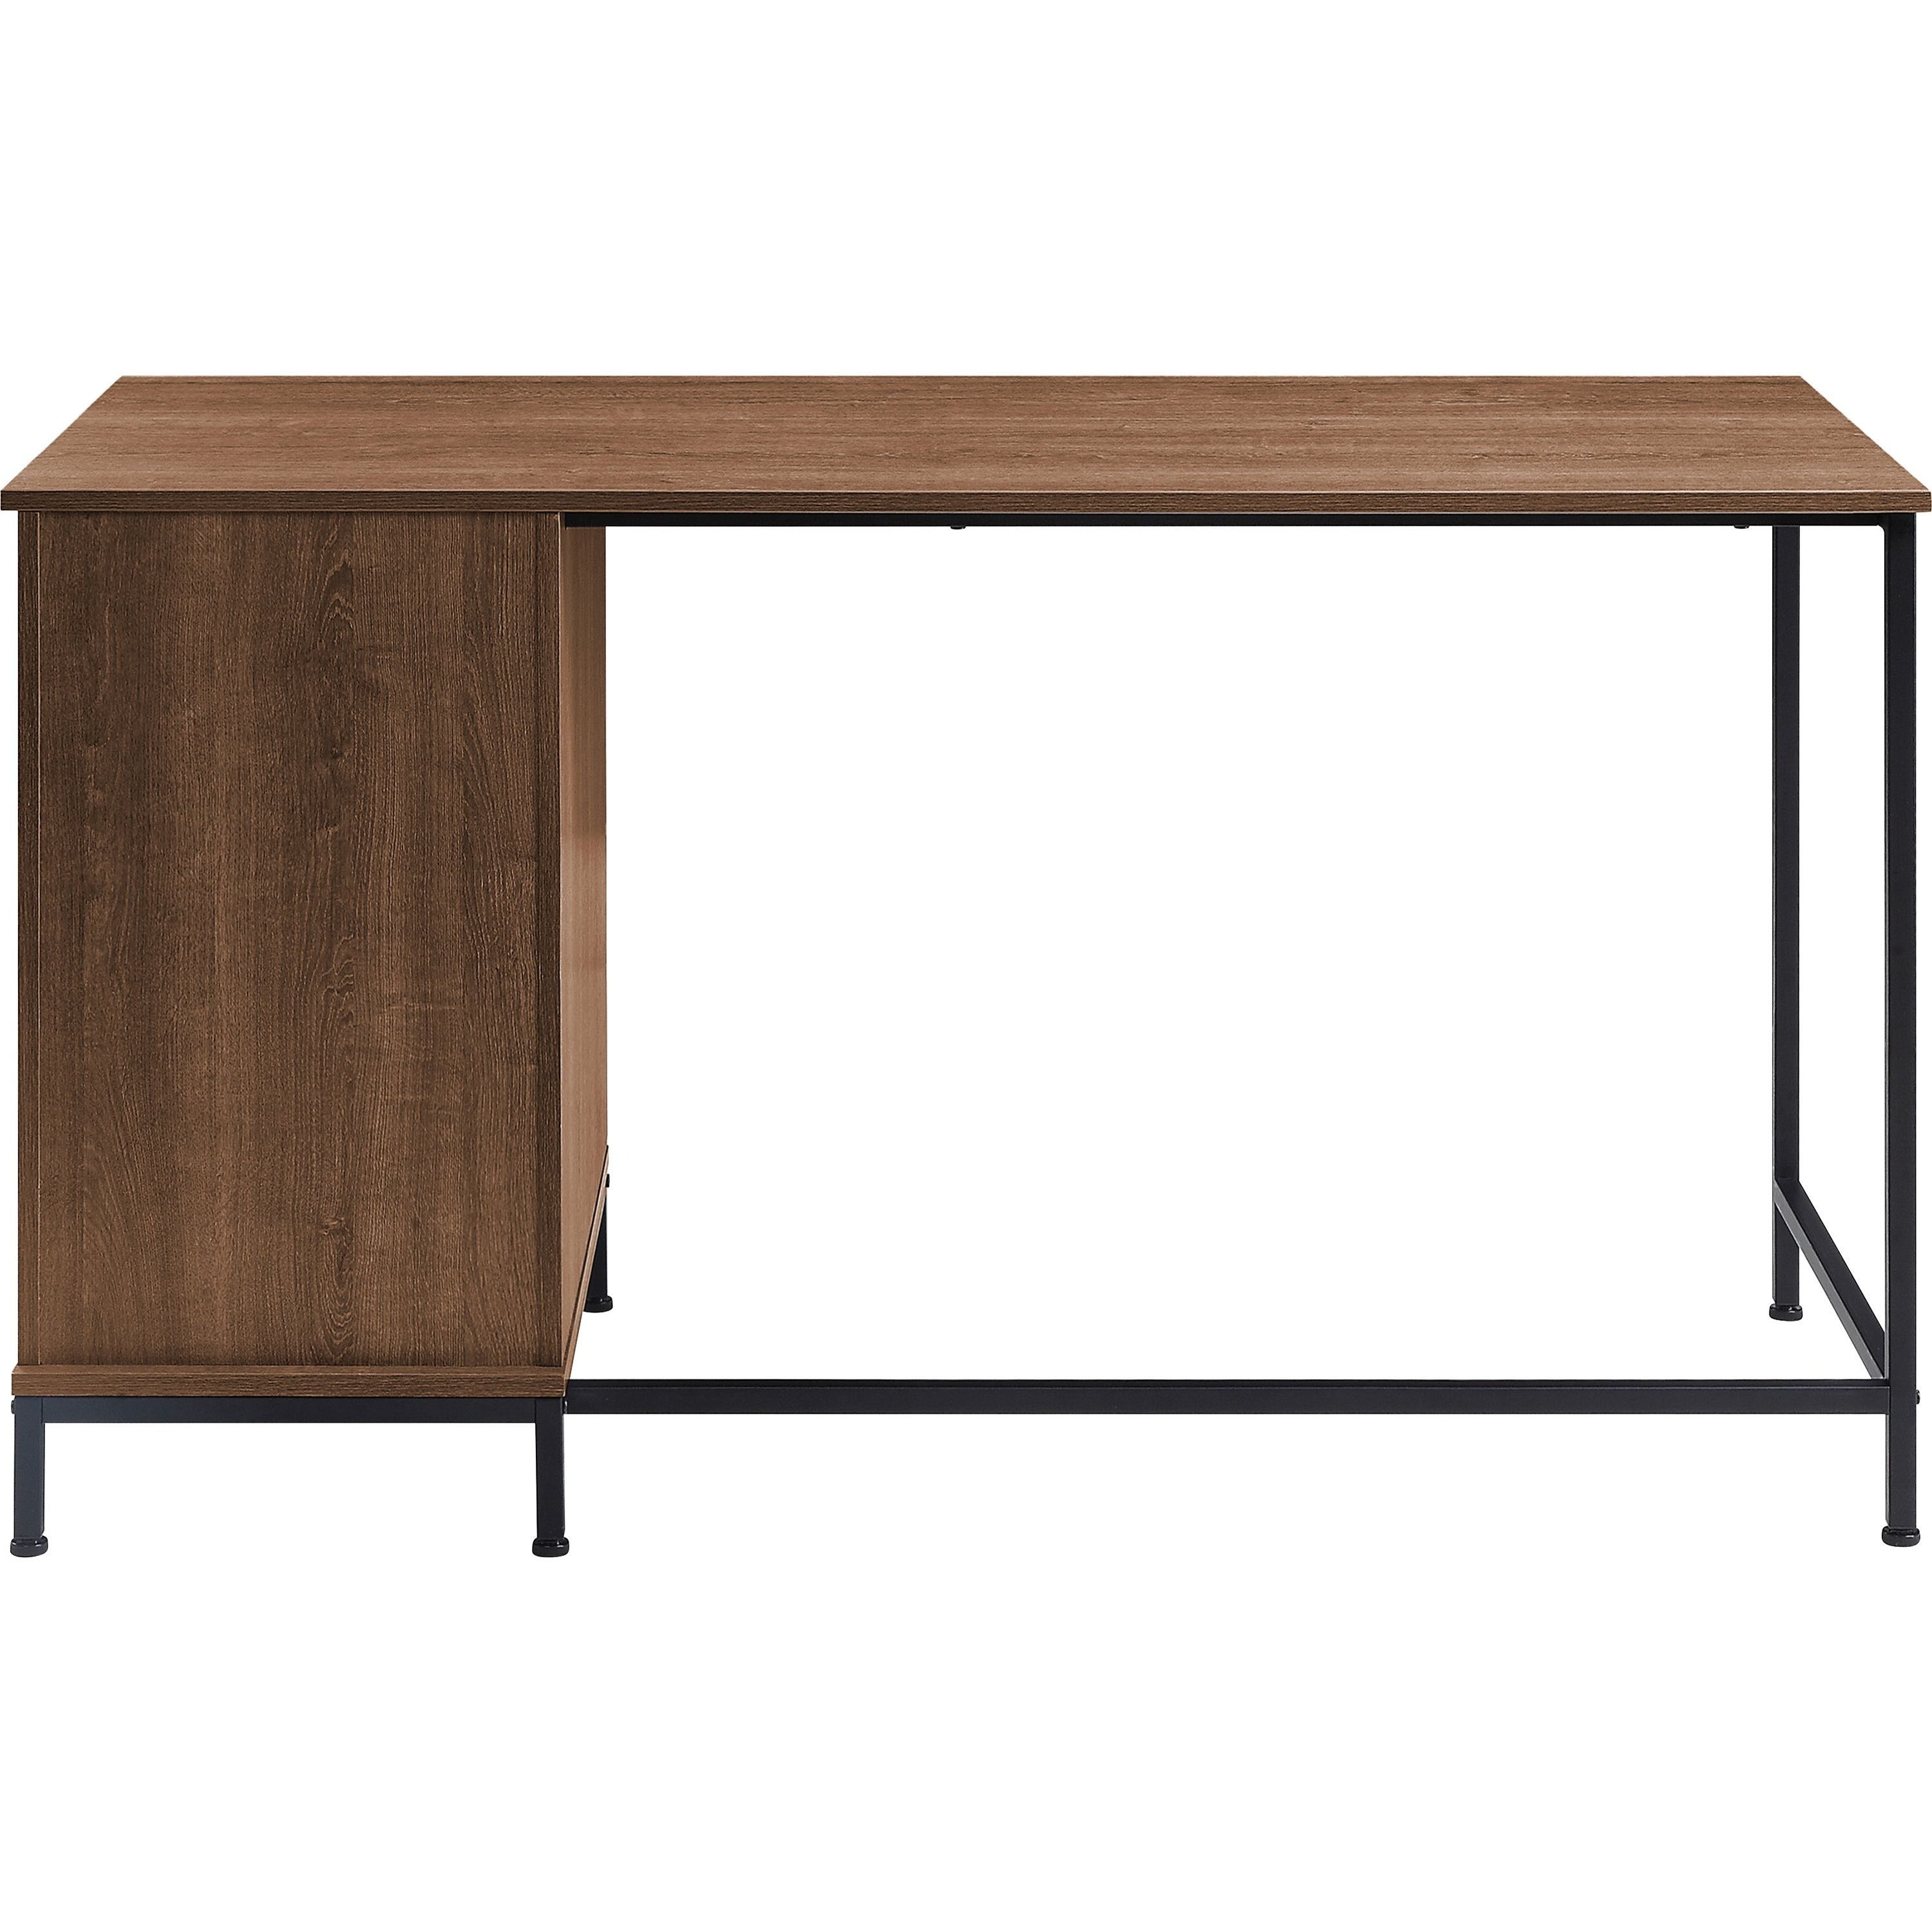 lorell-soho-desk-with-side-drawers-55-x-23630-3-x-file-drawers-single-pedestal-on-right-side-finish-walnut_llr97615 - 4